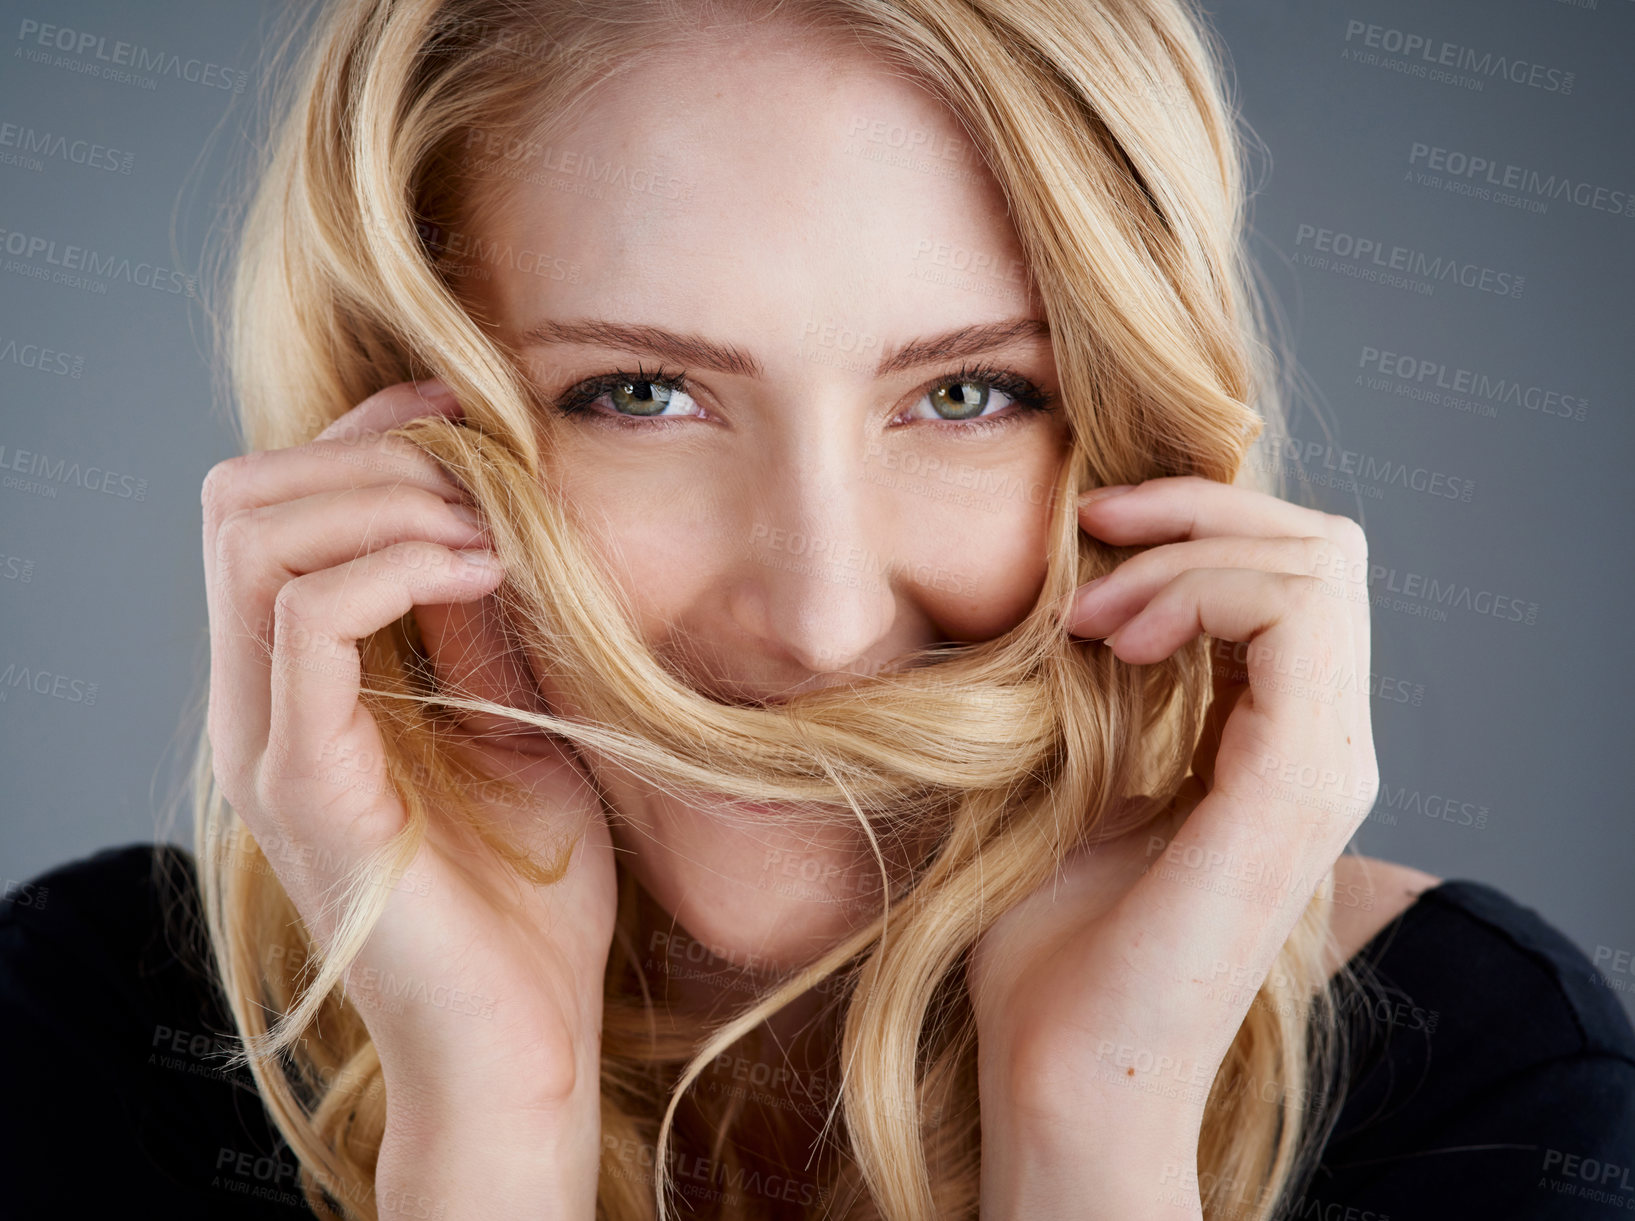 Buy stock photo Studio portrait of an attractive young woman playing with her hair against a gray background